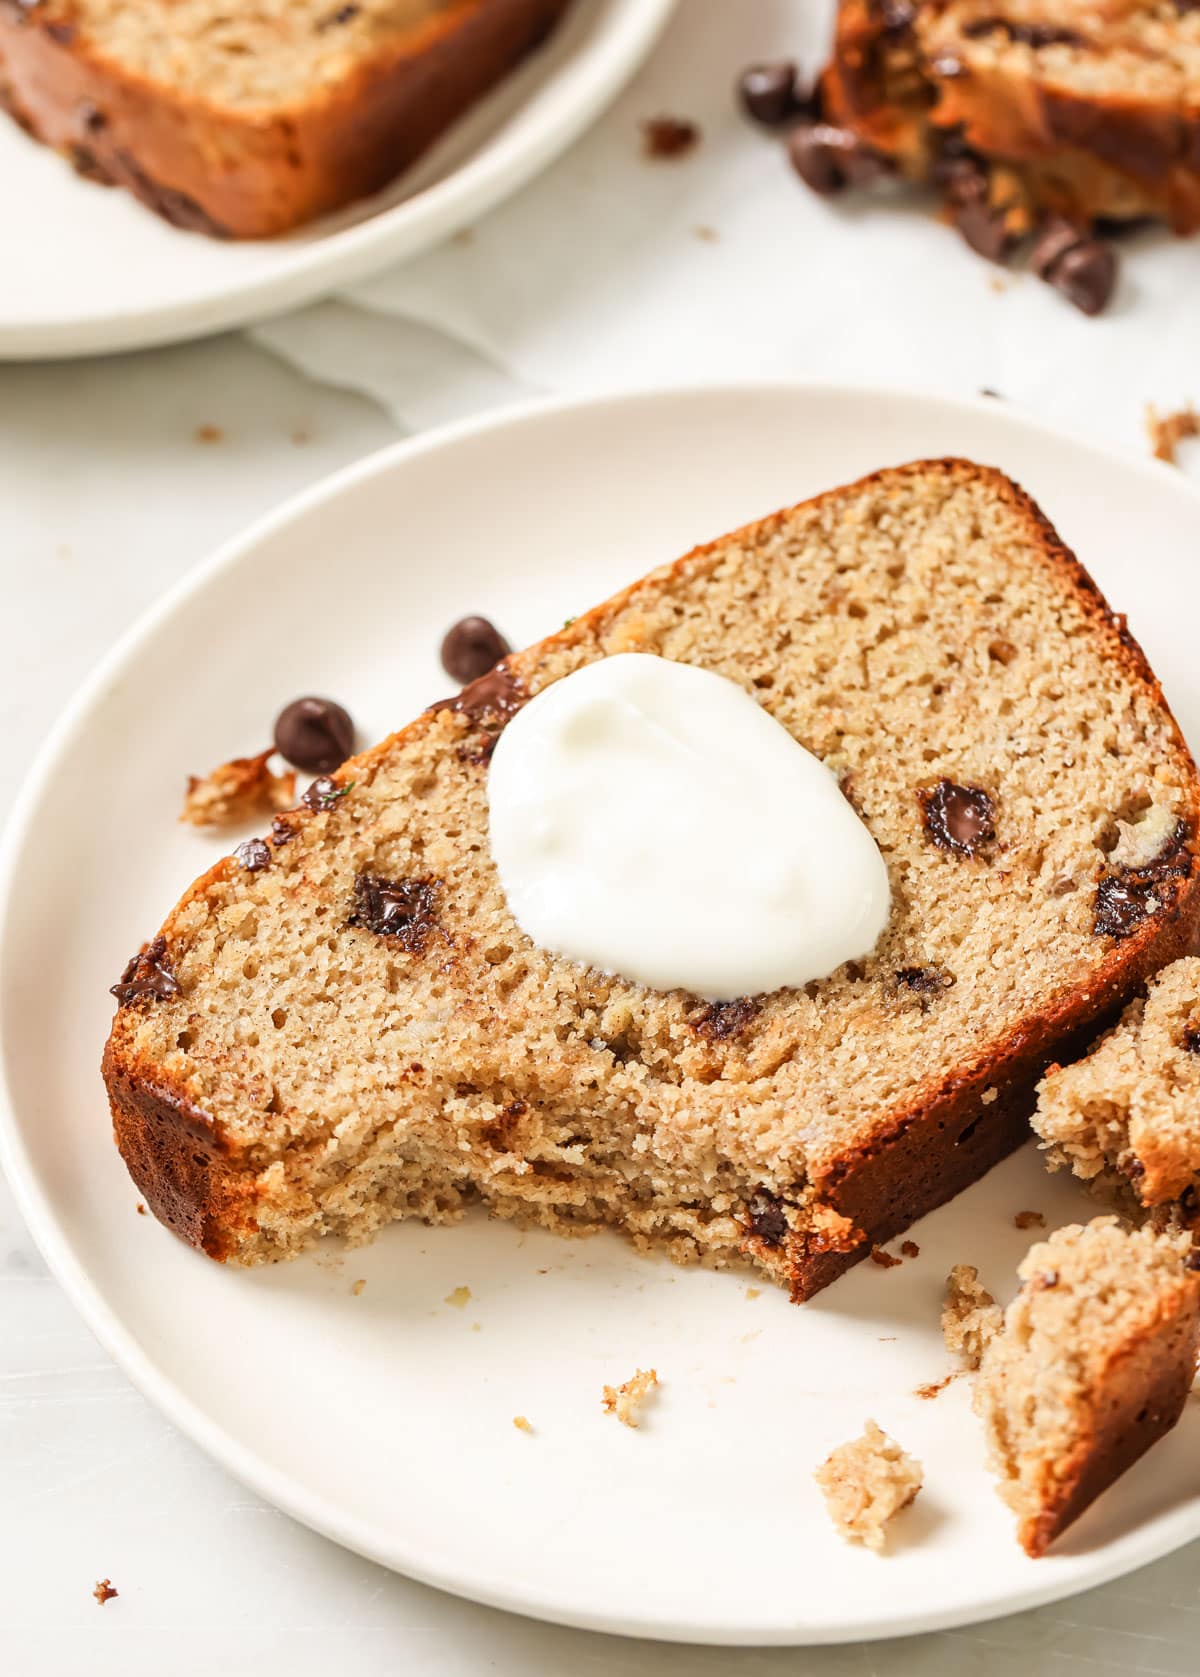 A slice of banana bread on a plate with a dollop of yoghurt.